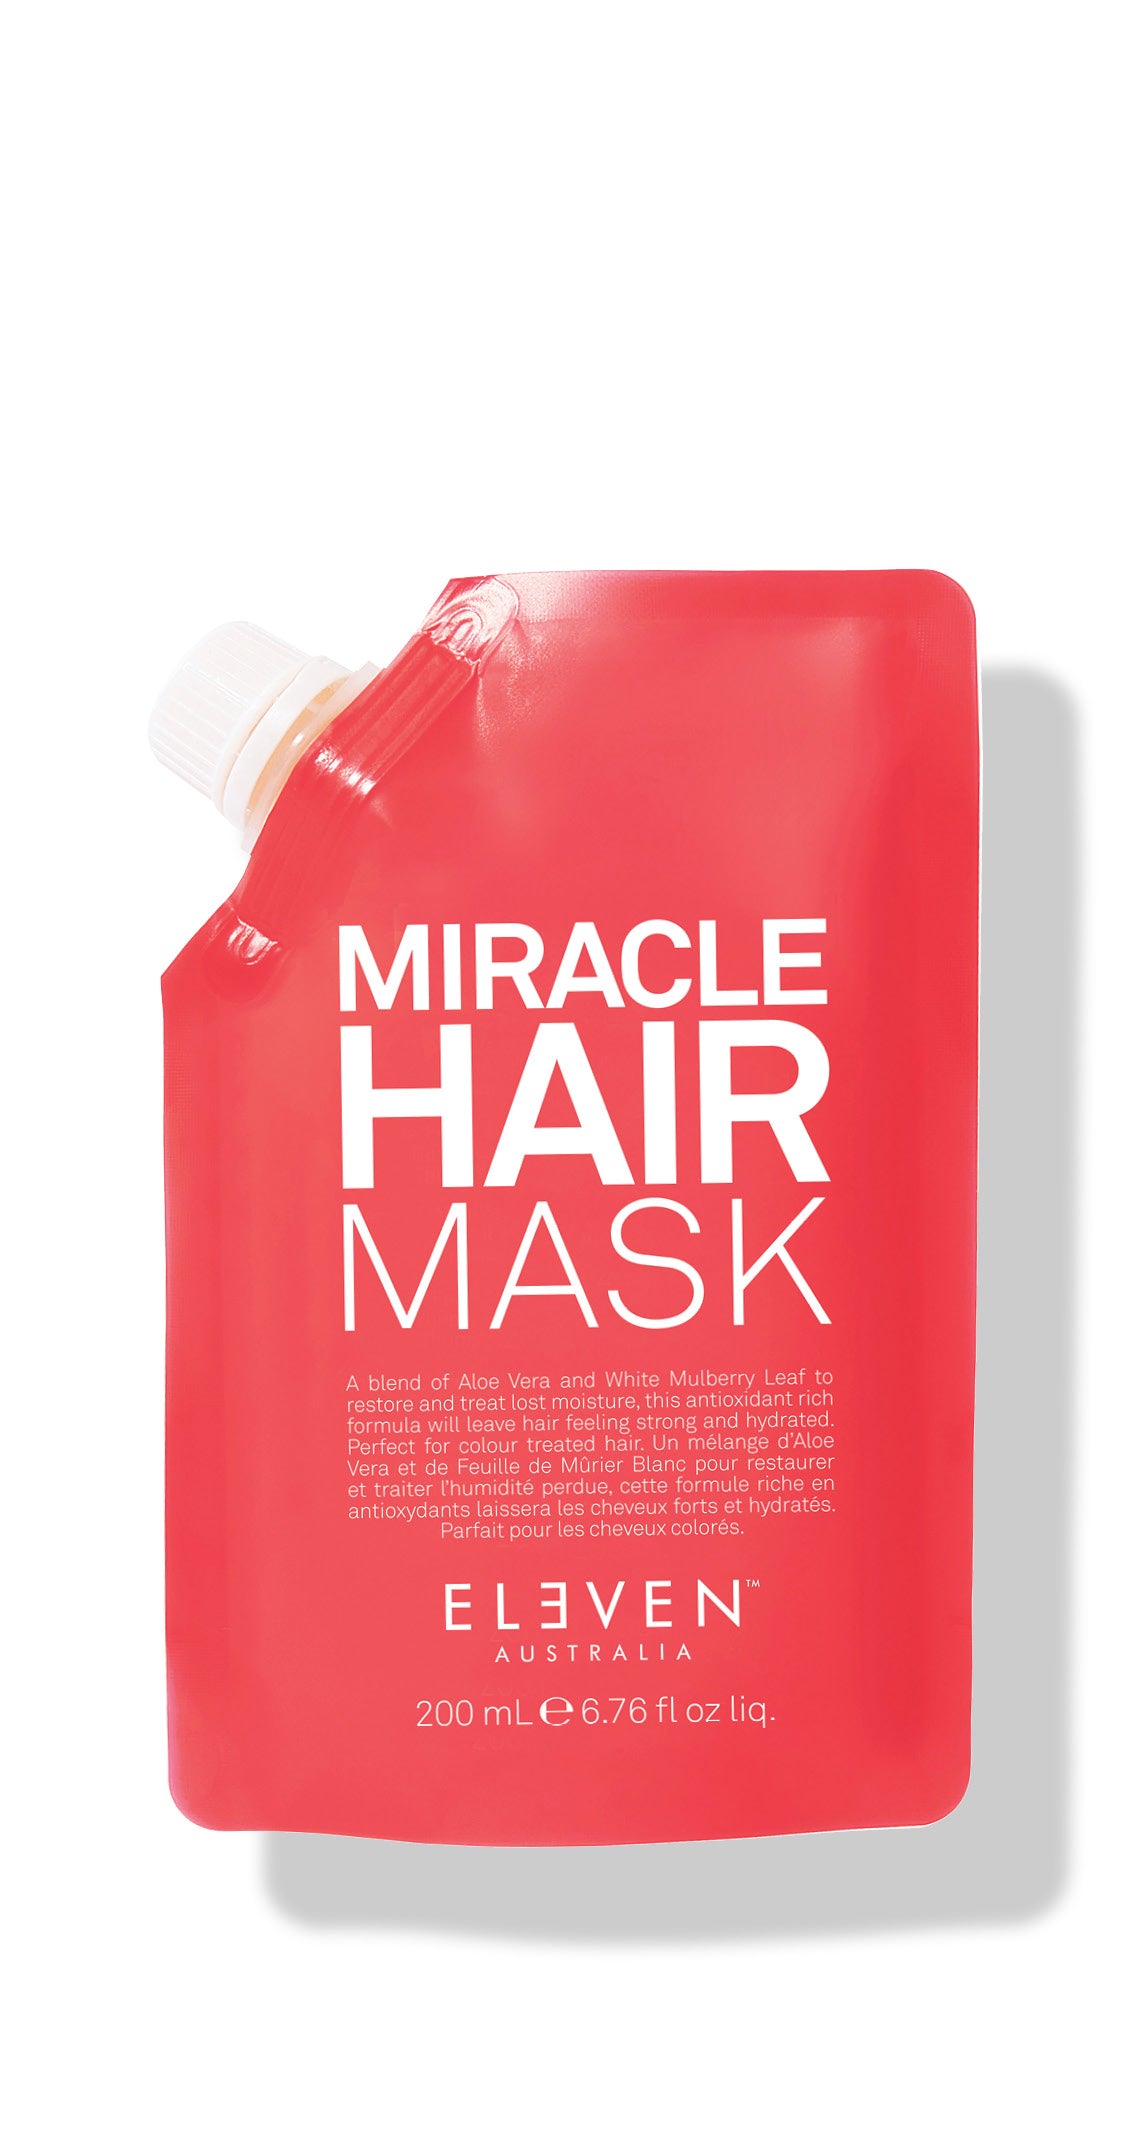 The ELEVEN Hair MIRACLE HAIR MASK has a blend of Aloe Vera and White Mulberry Leaf to restore and treat lost moisture, this antioxidant-rich formula will leave hair feeling strong and hydrated